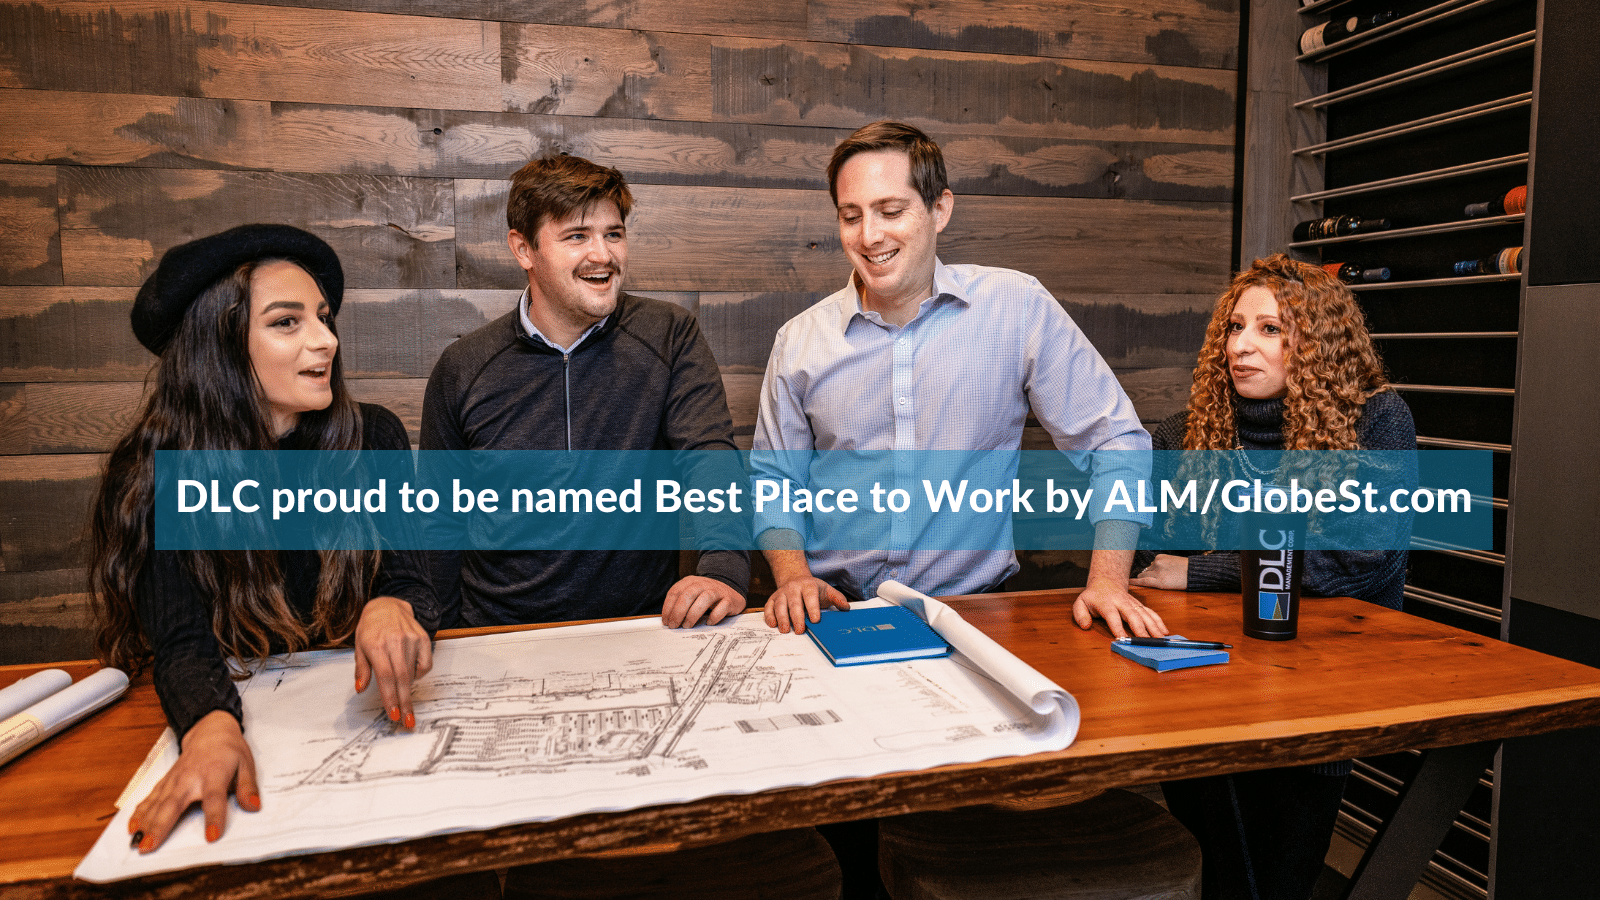 DLC teammates named a best place to work